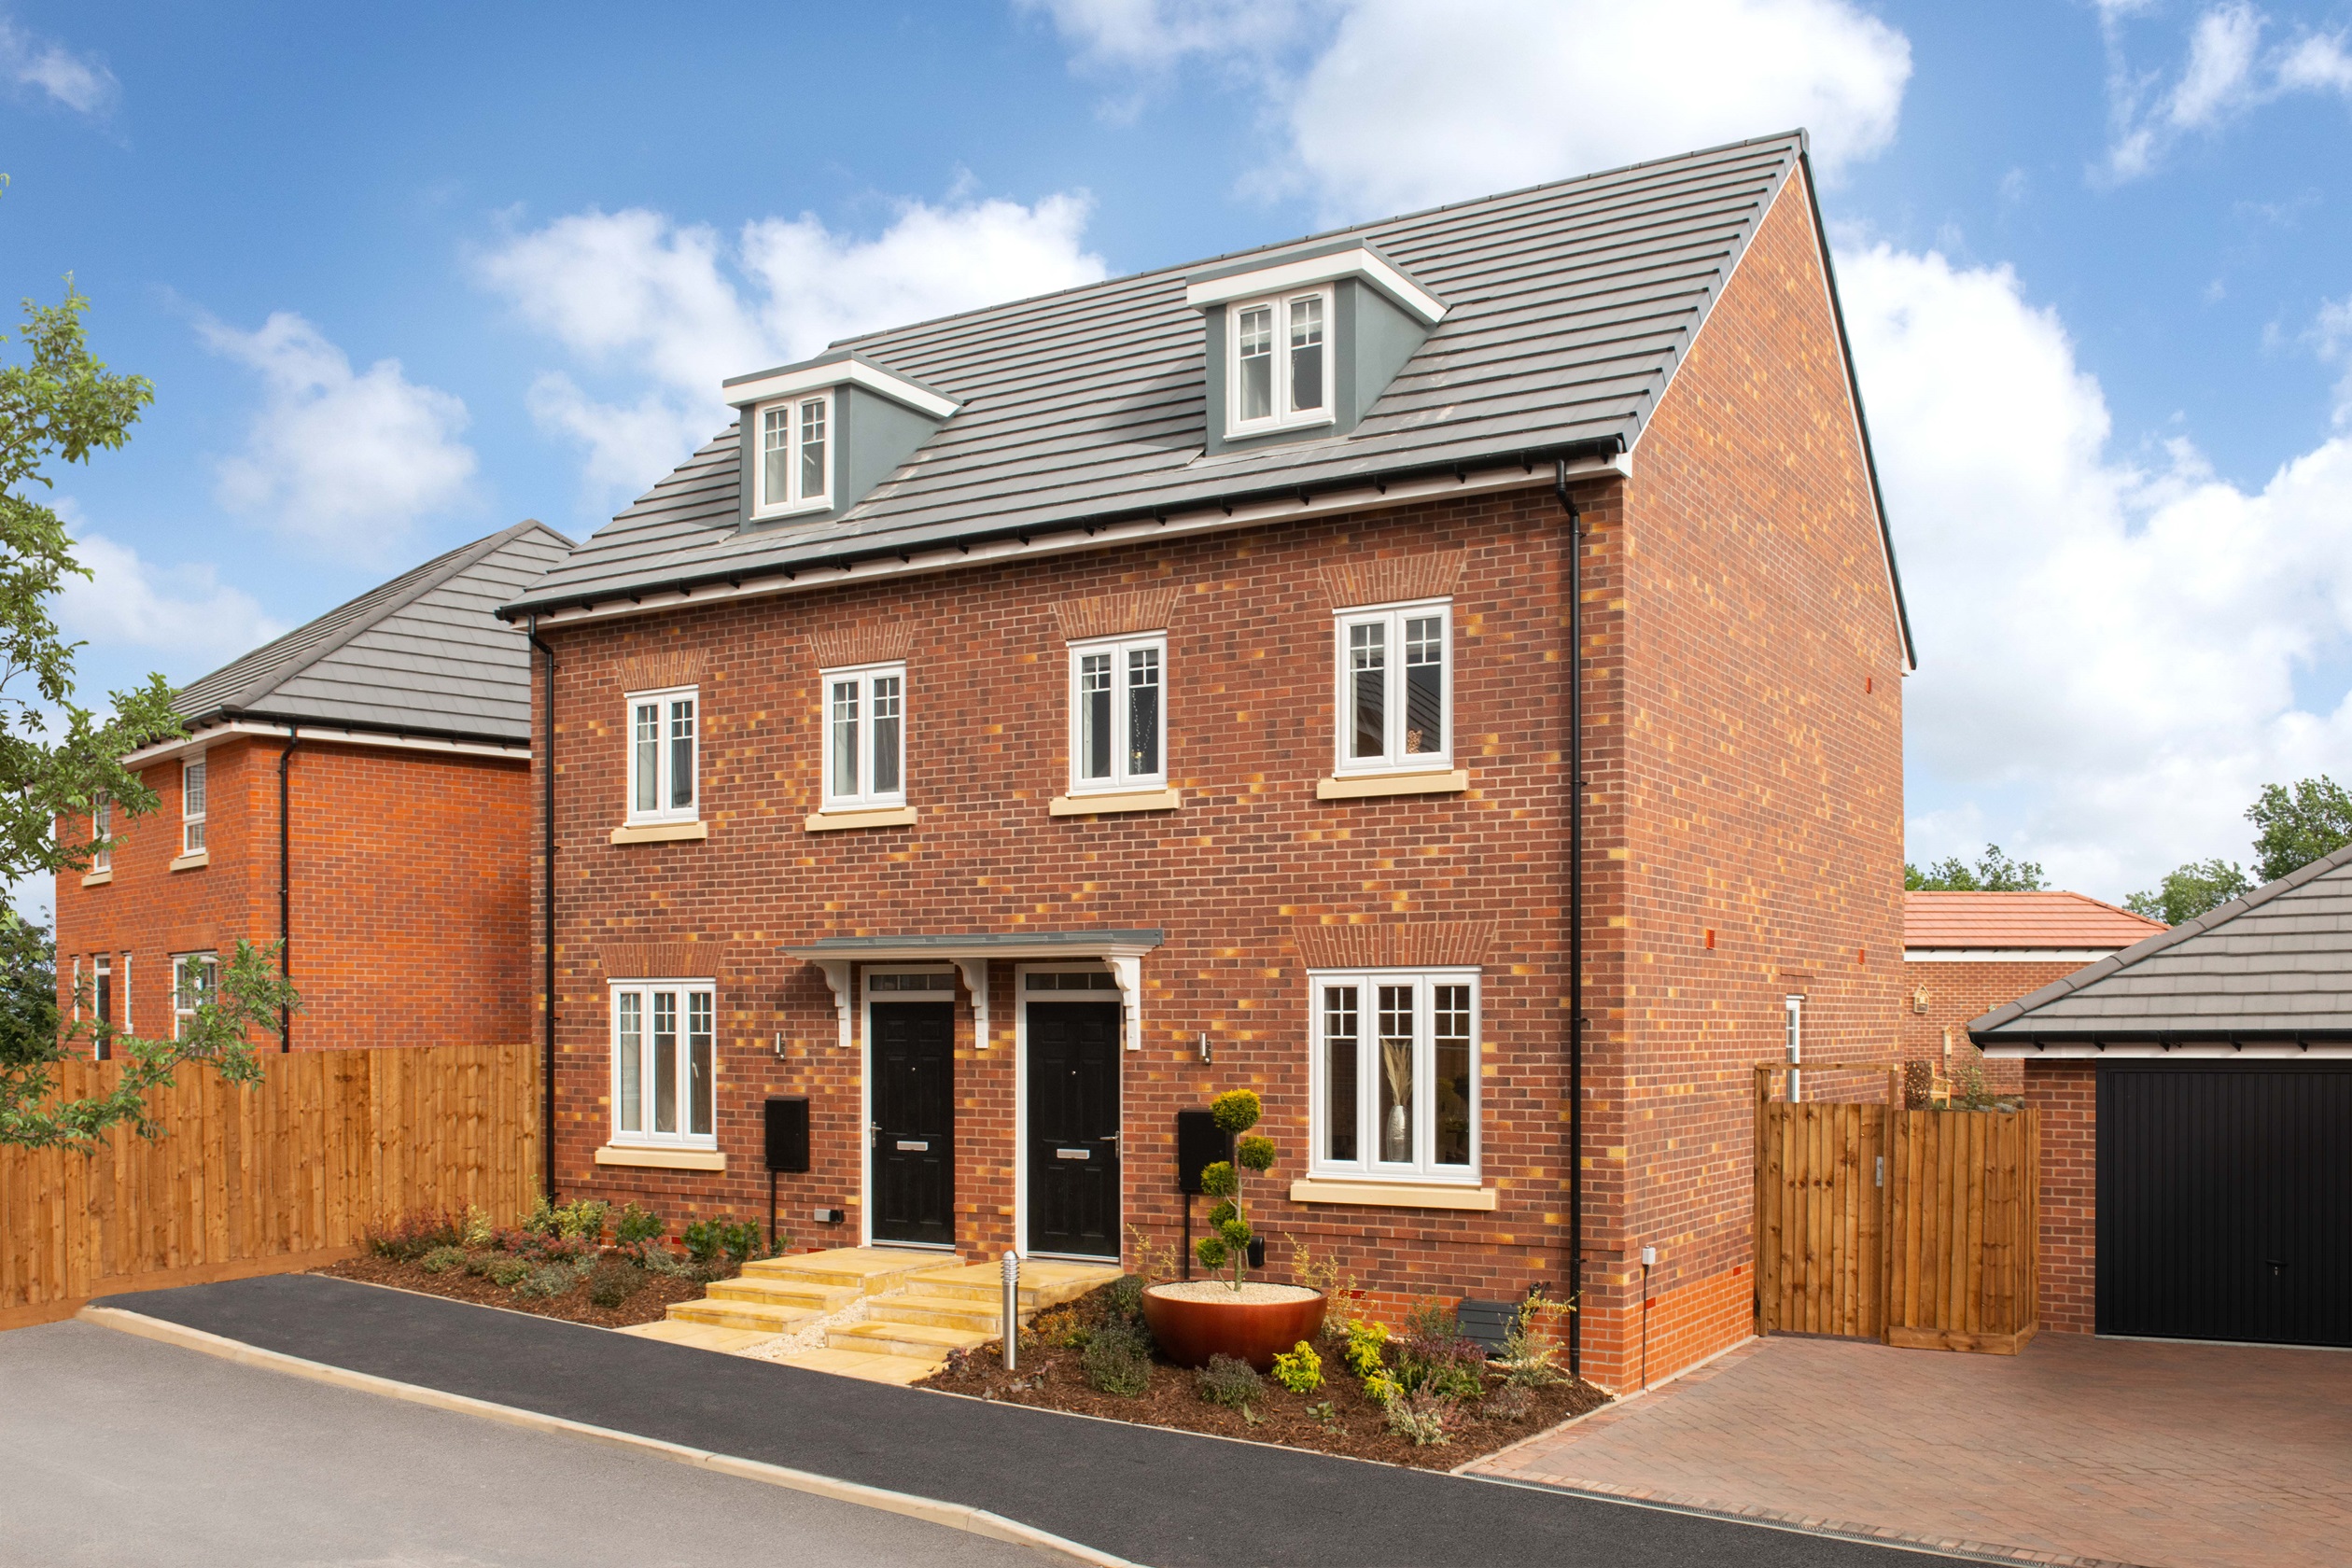 Property 2 of 10. 3-Storey Kennett Show Home At Tenchlee Place